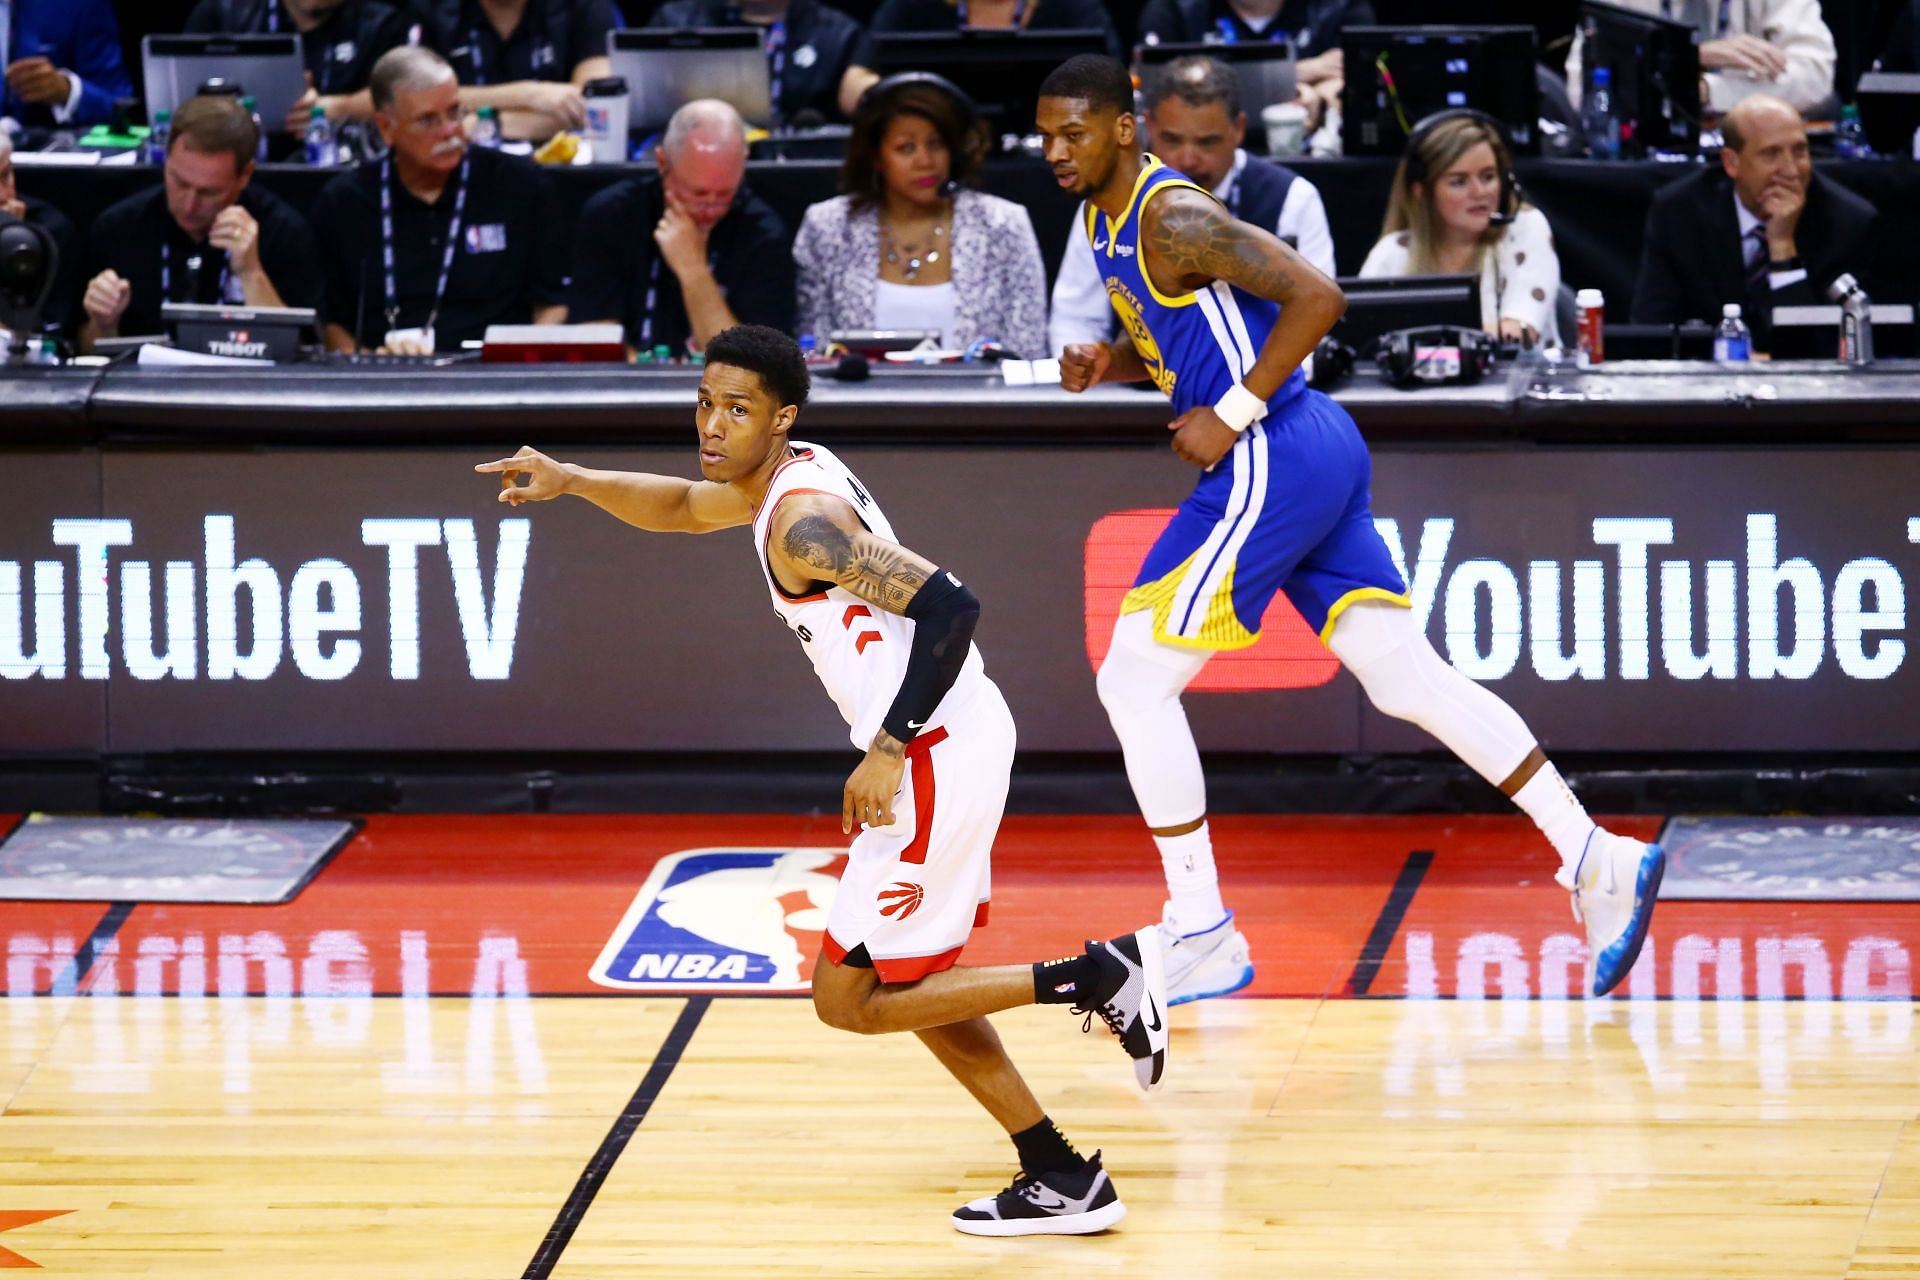 Patrick McCaw #1 of the Toronto Raptors celebrates a basket against the Golden State Warriors in the second half during Game One of the 2019 NBA Finals at Scotiabank Arena on May 30, 2019 in Toronto, Canada.